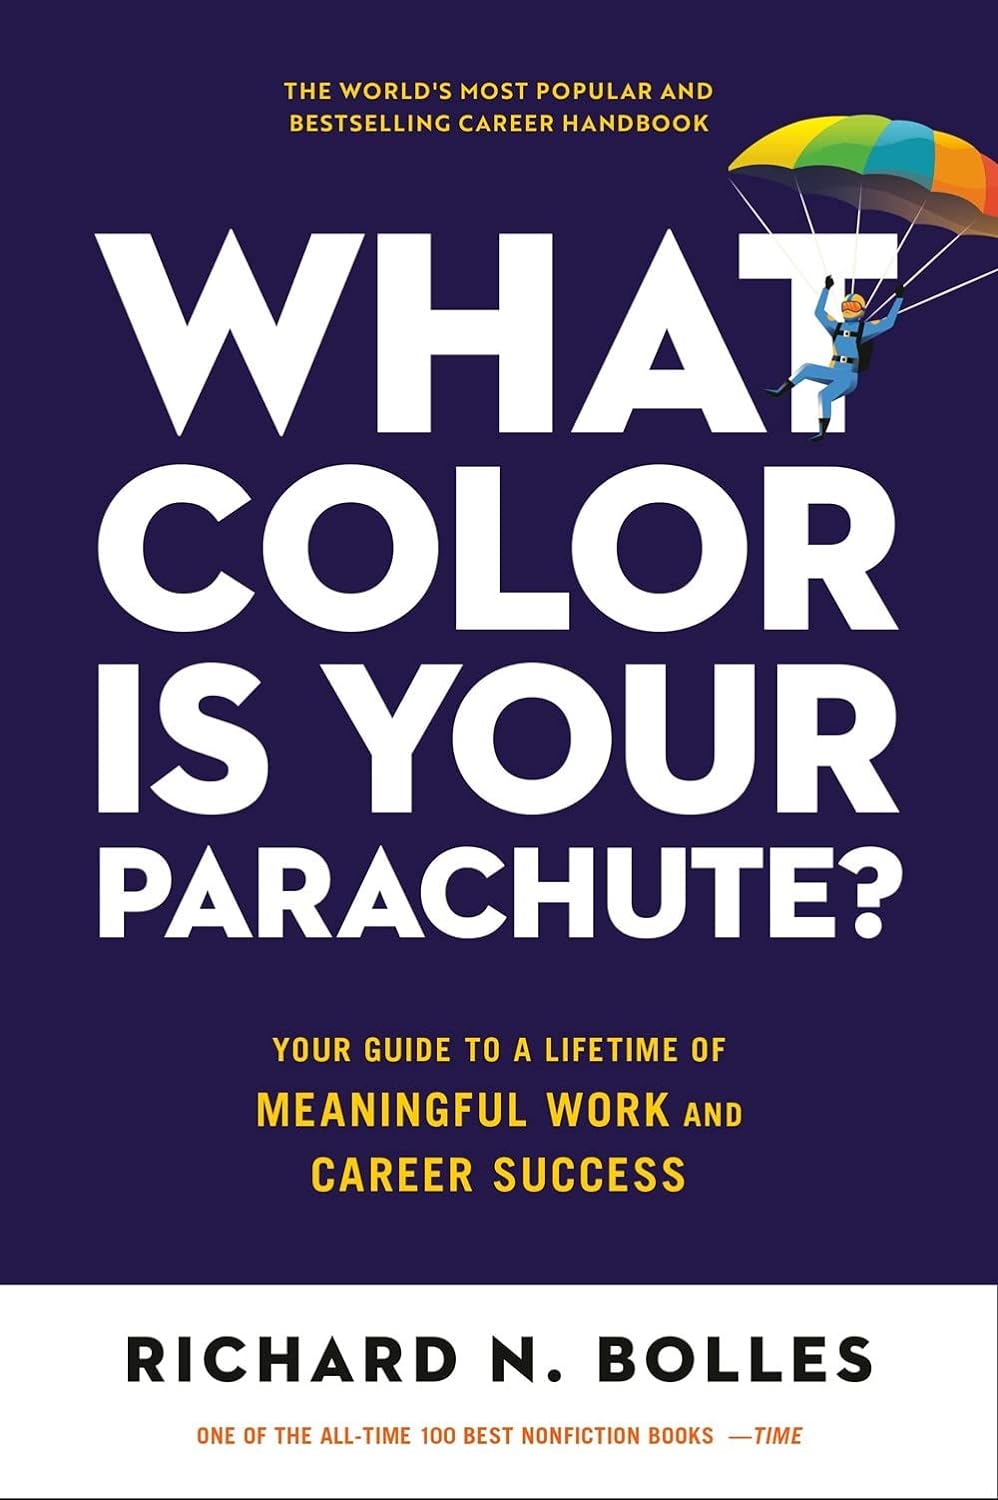 What Color Is Your Parachute Your Guide to a Lifetime of Meaningful Work and Career Success (Revised) - SureShot Books Publishing LLC